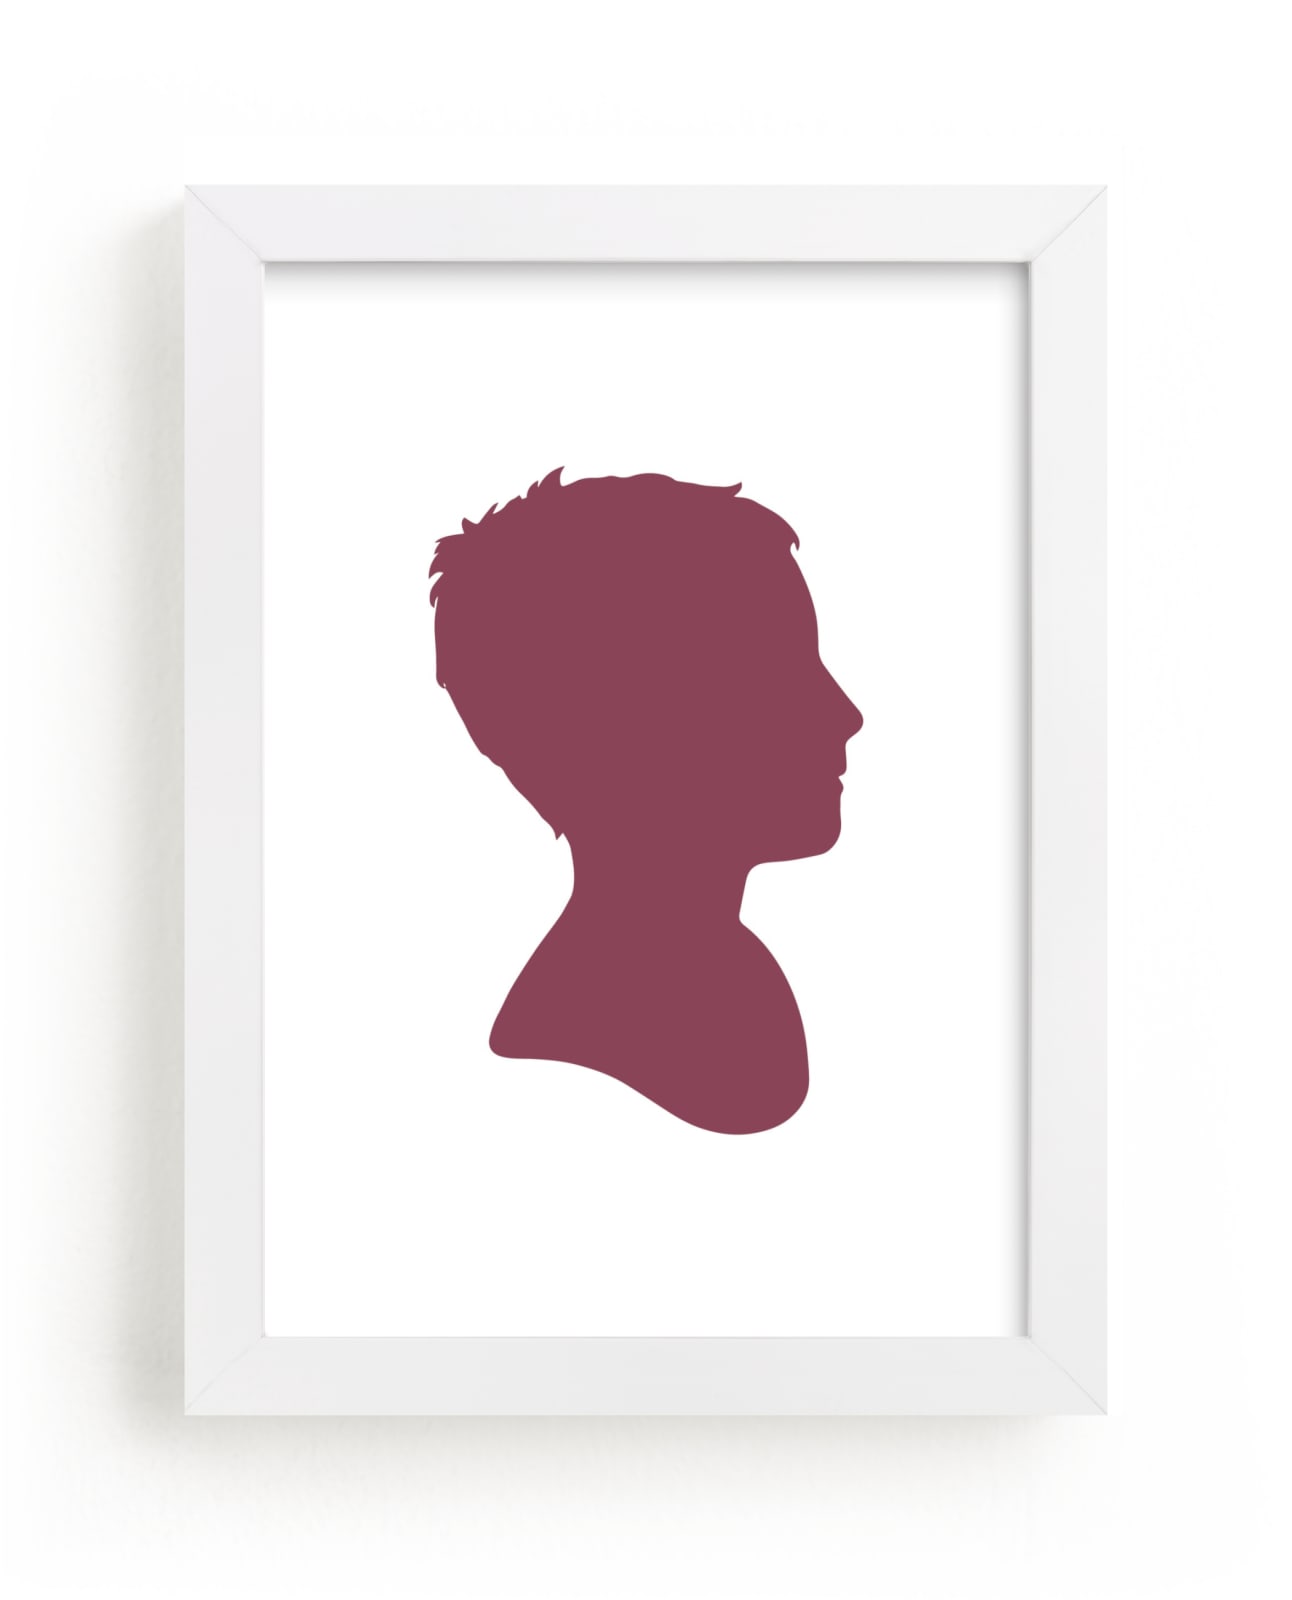 This is a red silhouette art by Minted called Custom Silhouette Art.